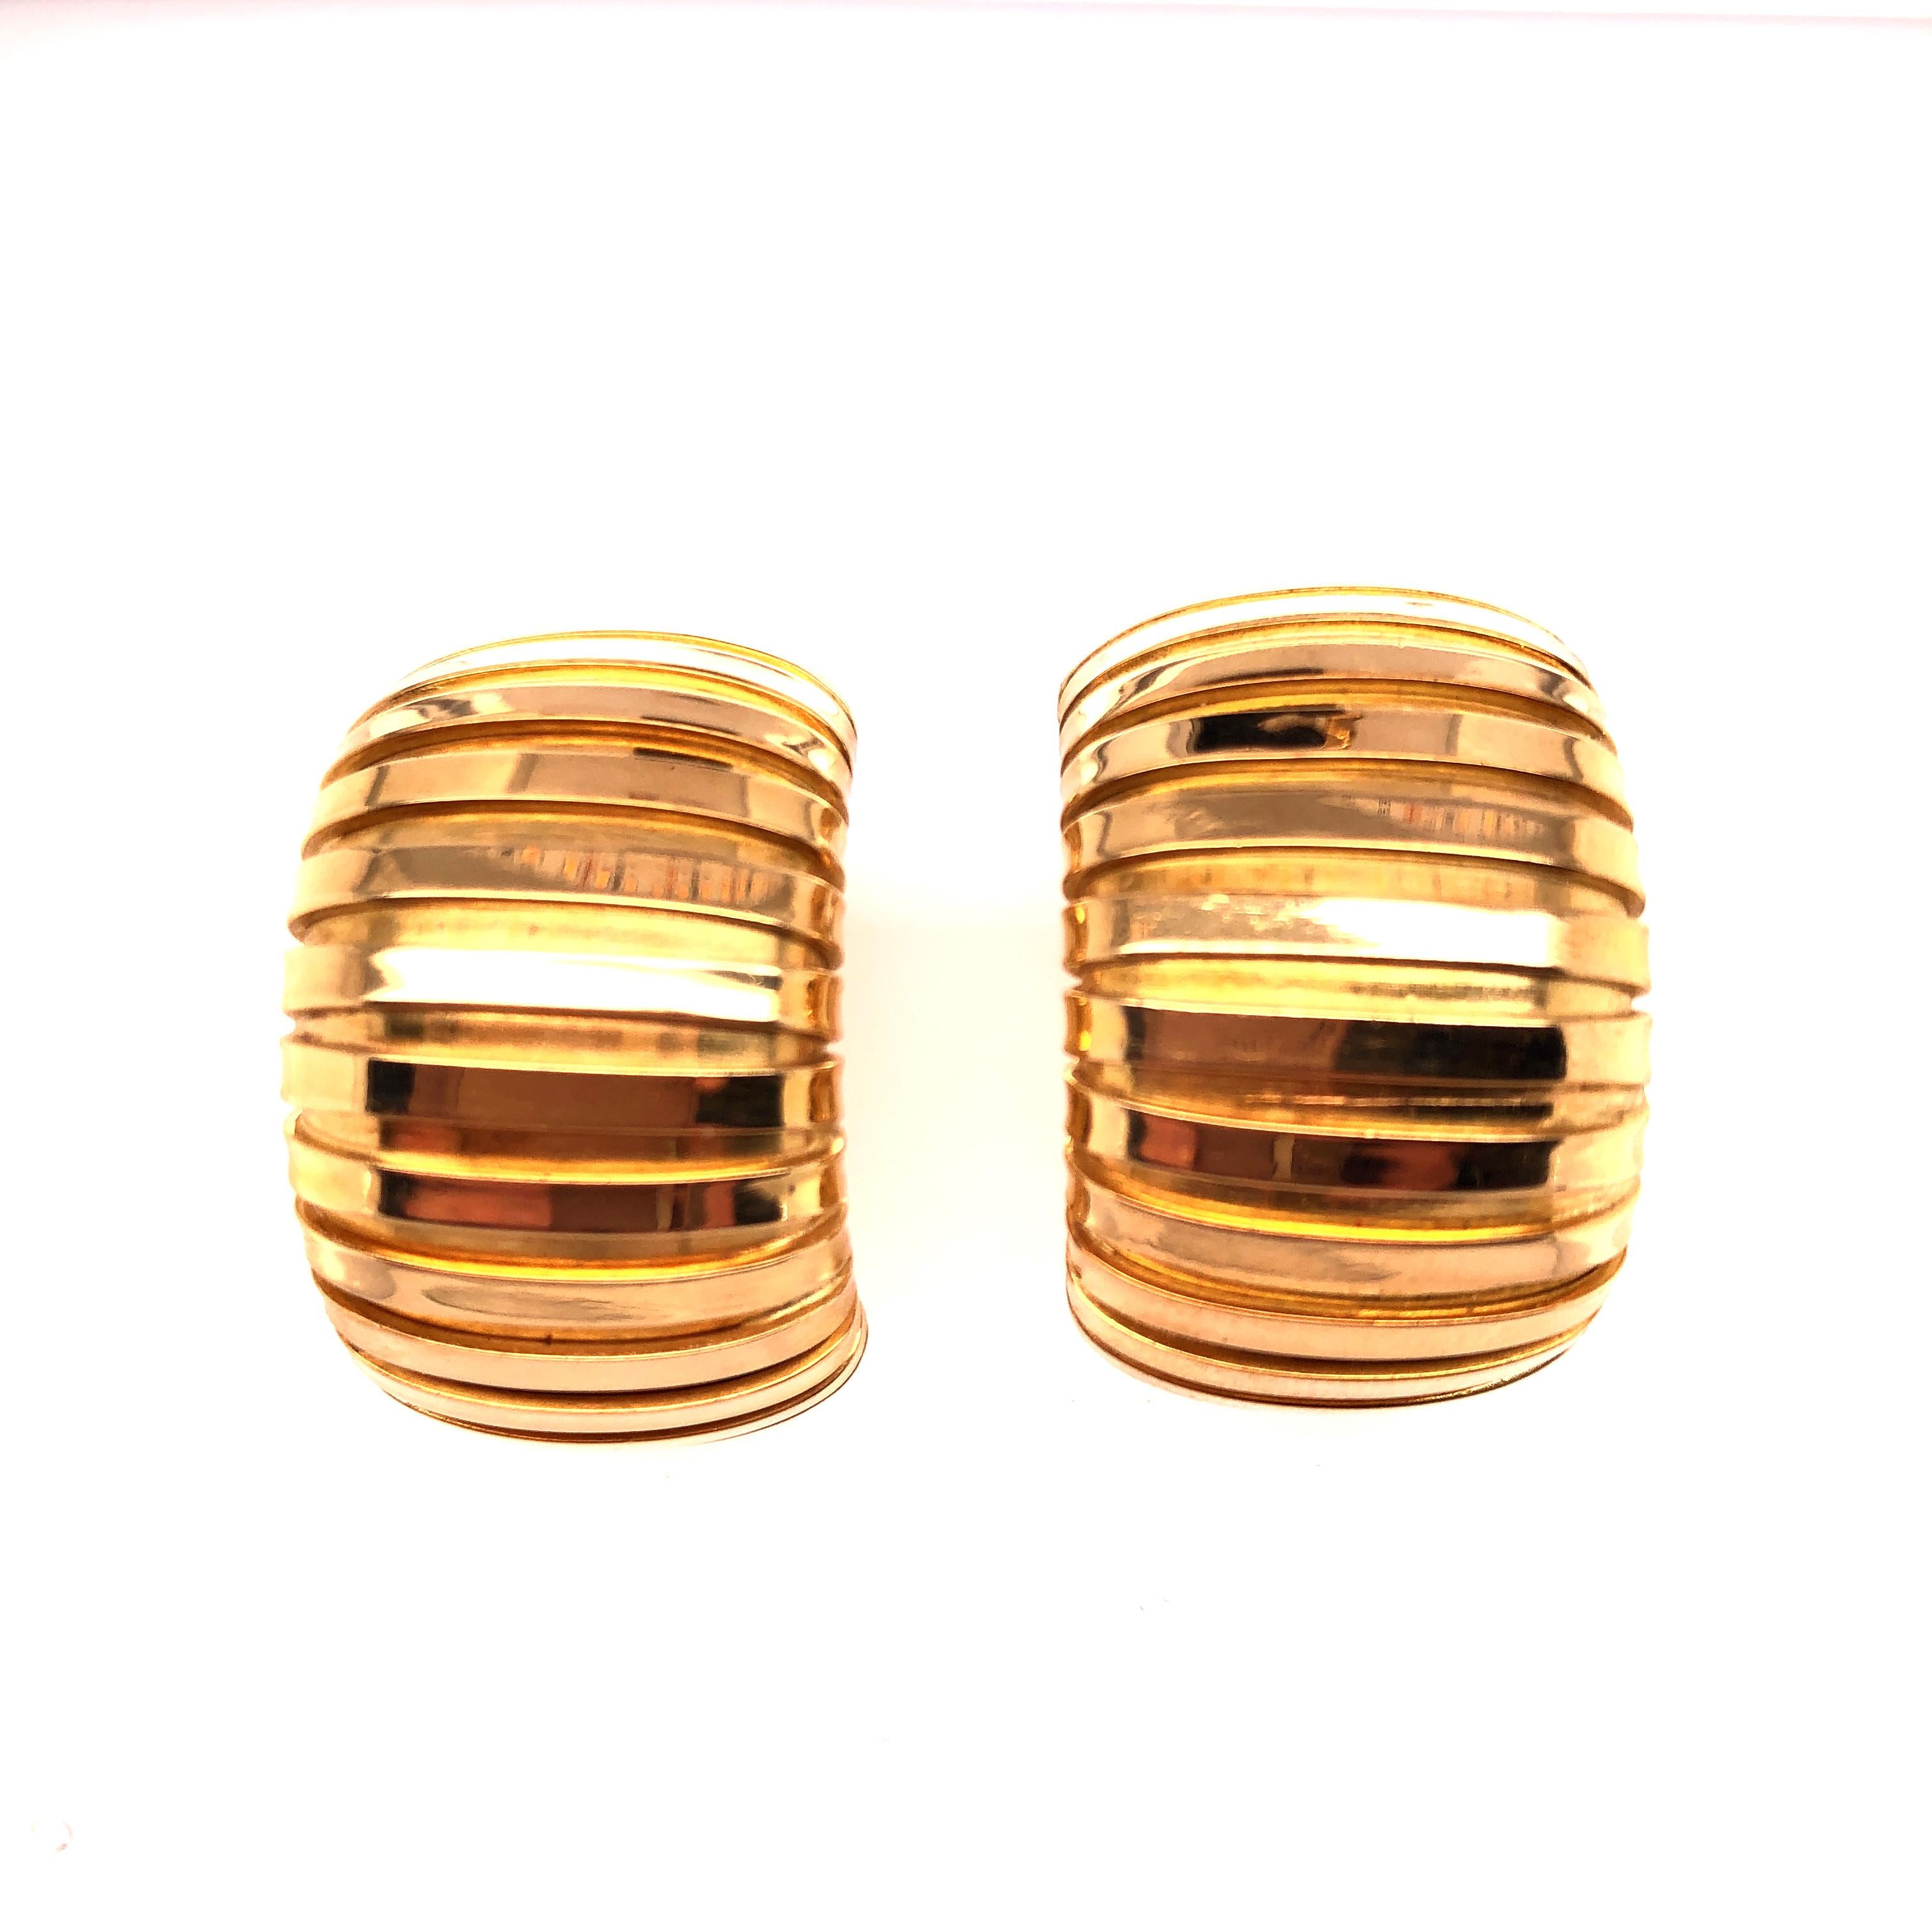 Carlo Weingrill's Turbogas hoops are the finishing touch to your business attire. The accordion effect created by the design plays with the light giving the earrings dimension. 18K yellow gold. Made in Italy.

From the Skibell Estate